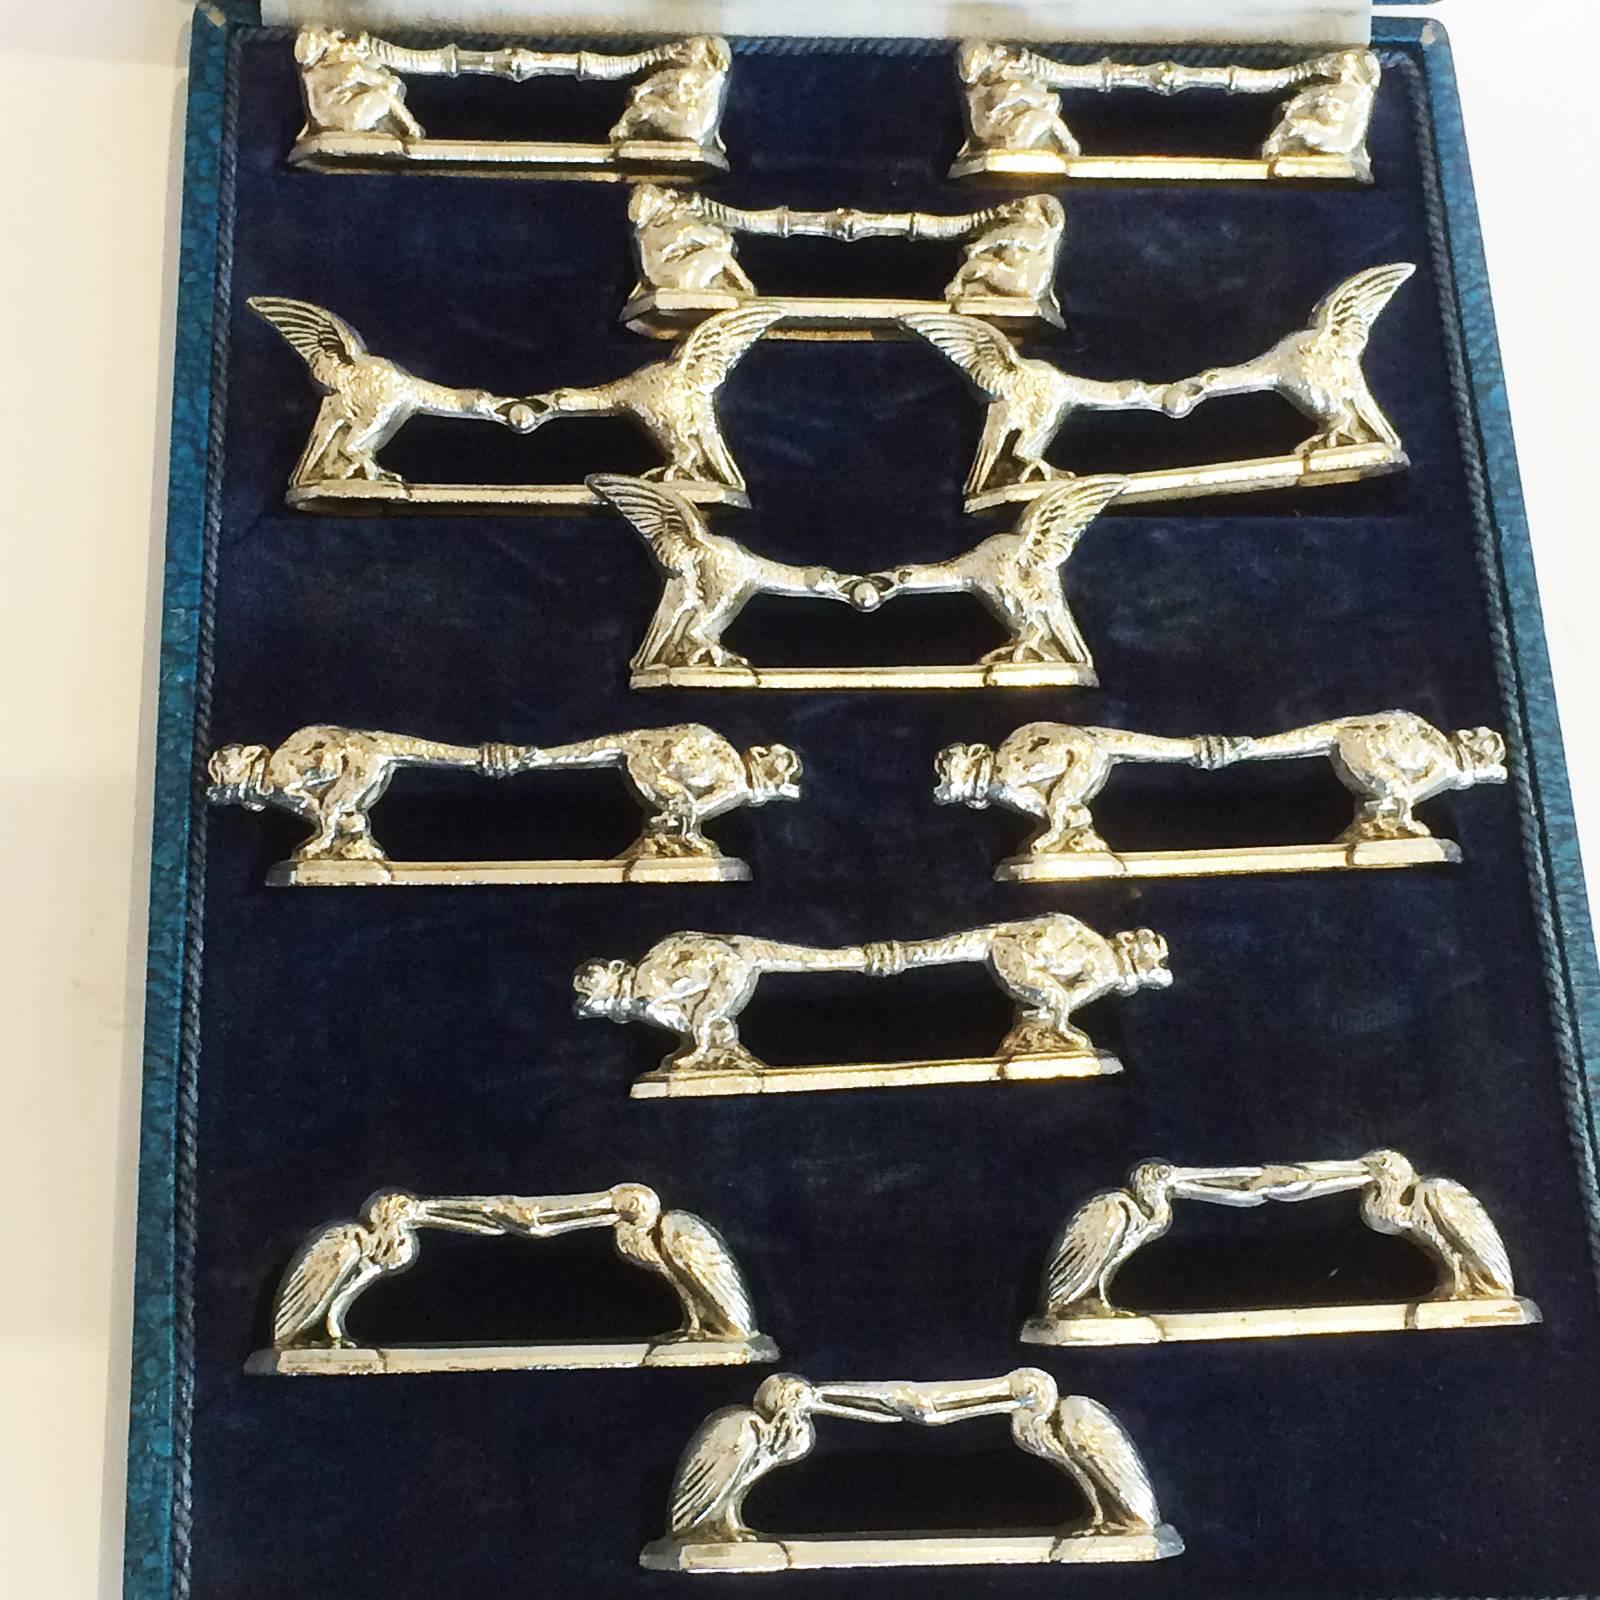 Rare boxed original set of 12 French Art Deco knife rests. Elephants, birds, pelicans, etc. Possibly Benjamin Rabier in nickel silver. All in excellent condition with soft aged patina, no damage, no repairs or losses. 
Dimensions are approx..: 75mm